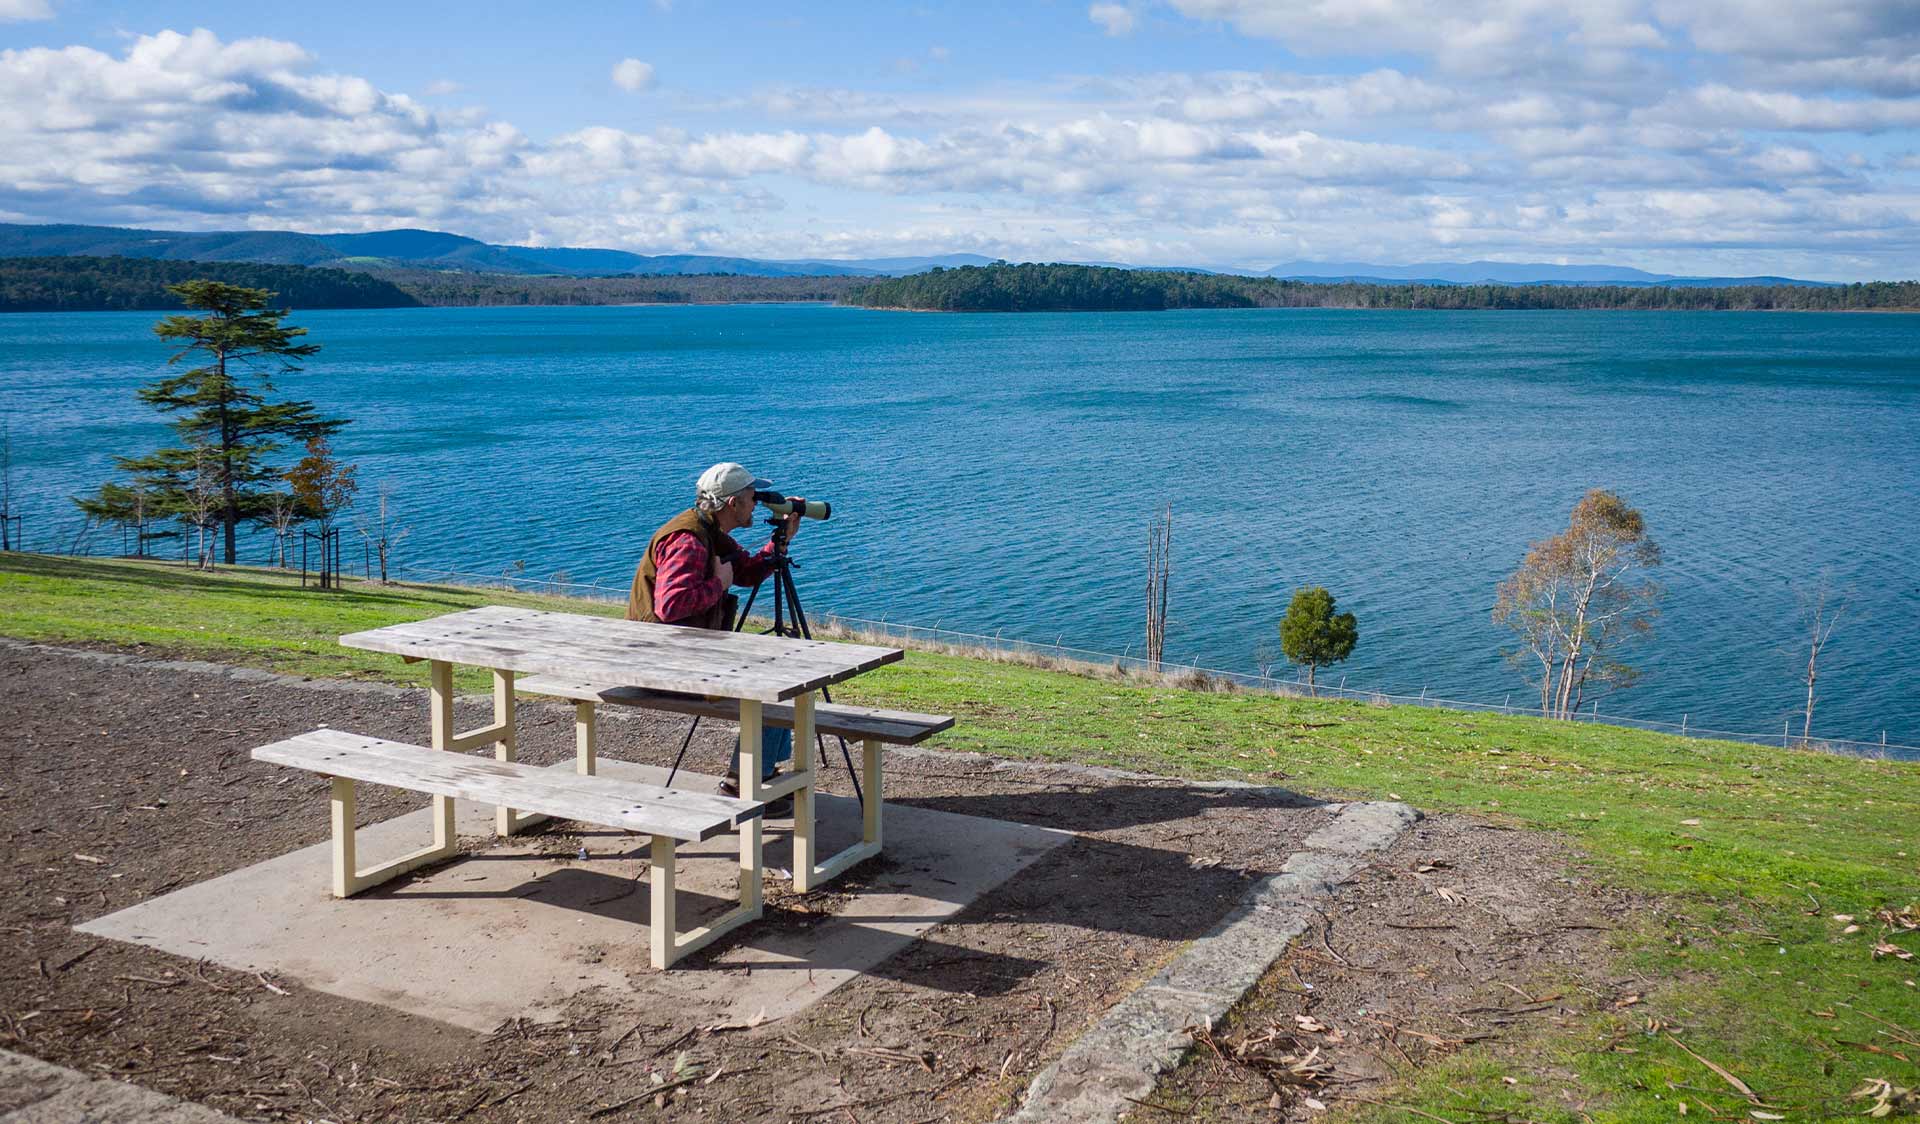 A man sitting at a picnic table looks out across the water through a small telescope at Yan Yean Reservoir.